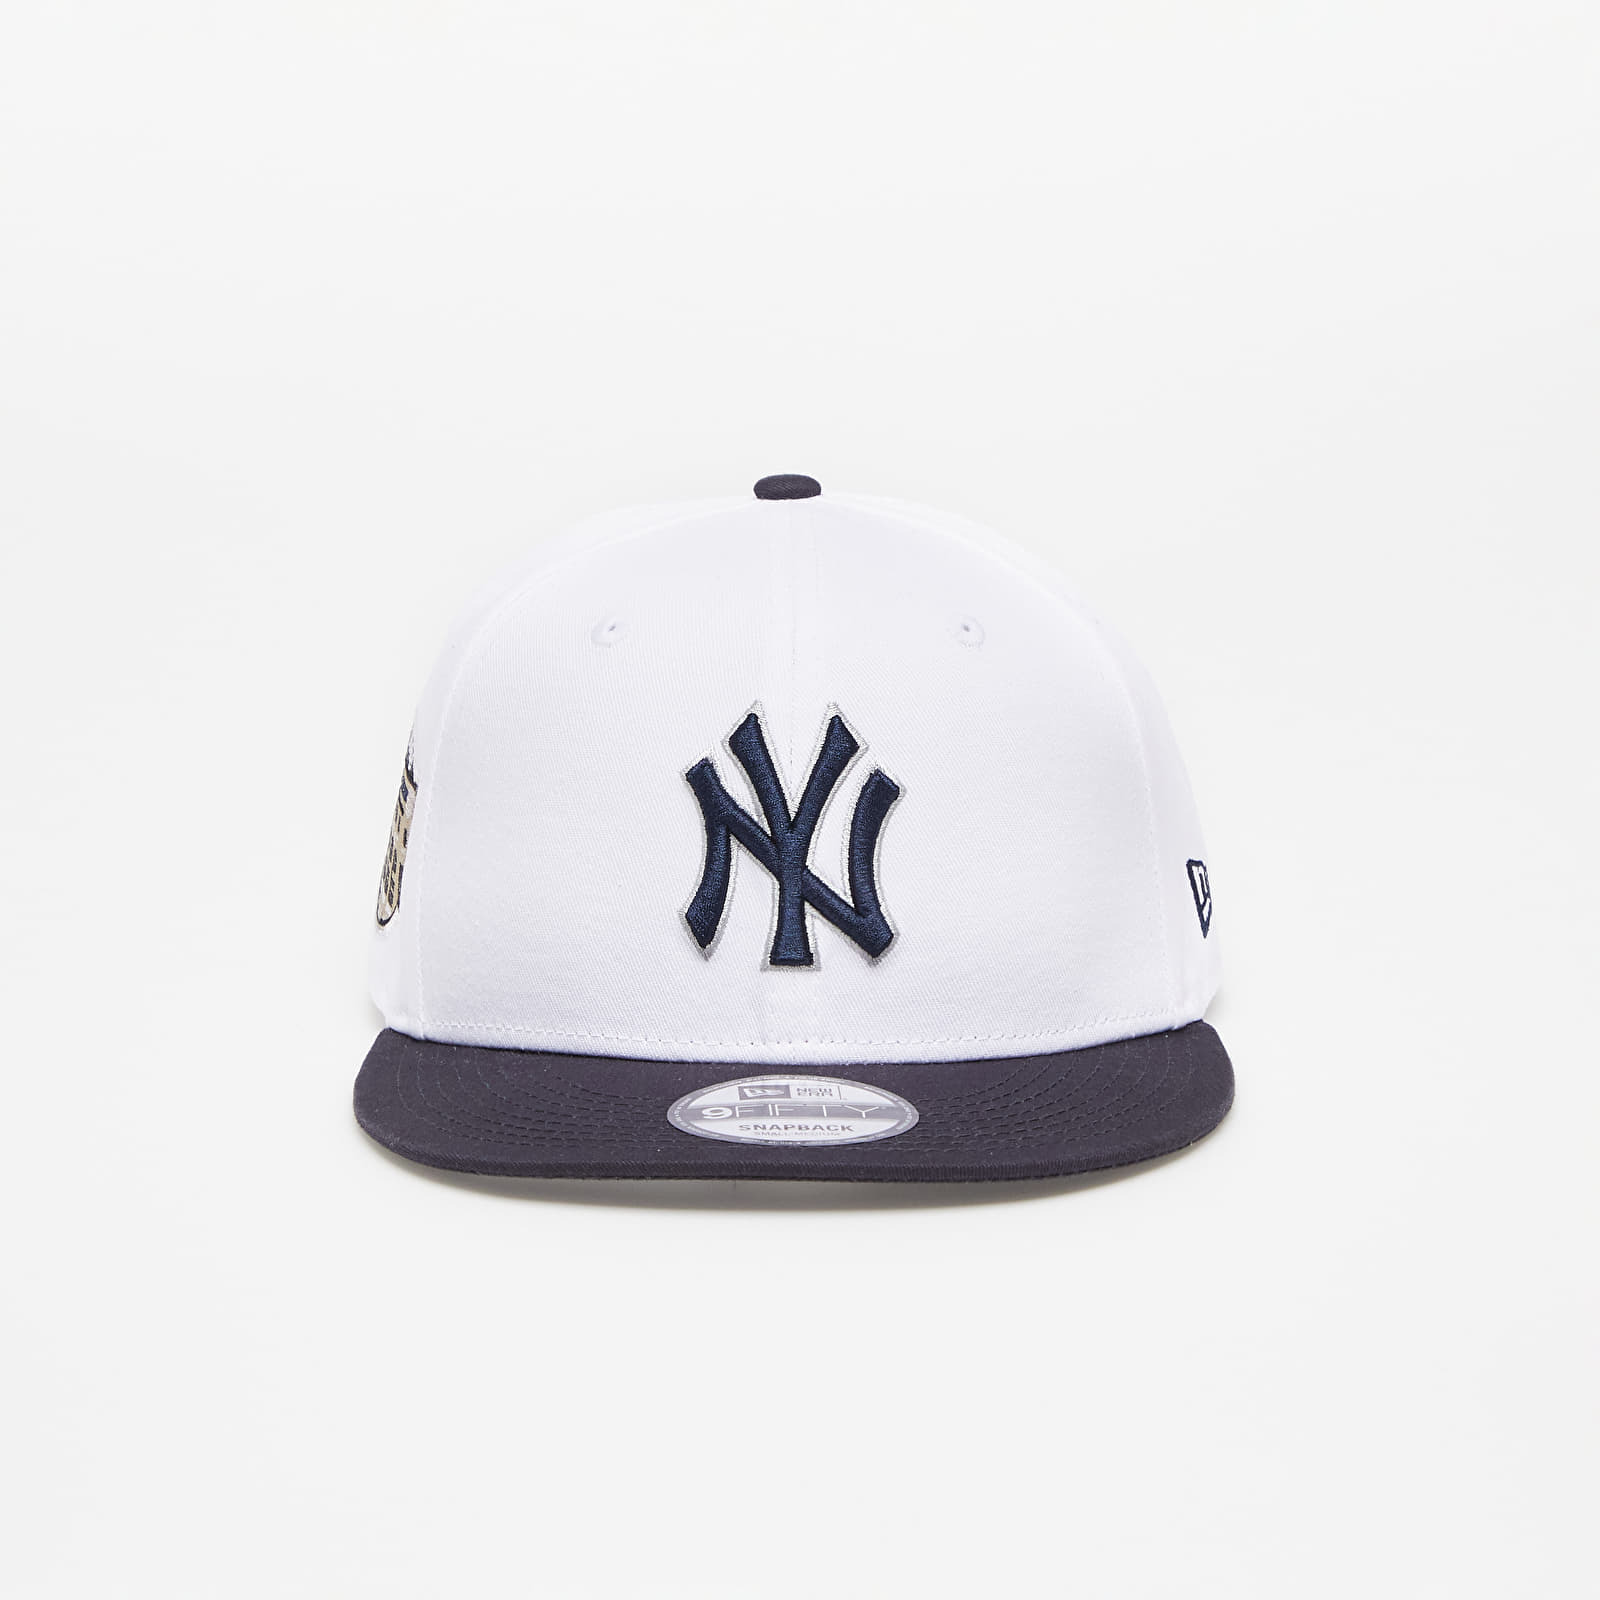 New Era - new york yankees crown patches 9fifty snapback cap white/ navy